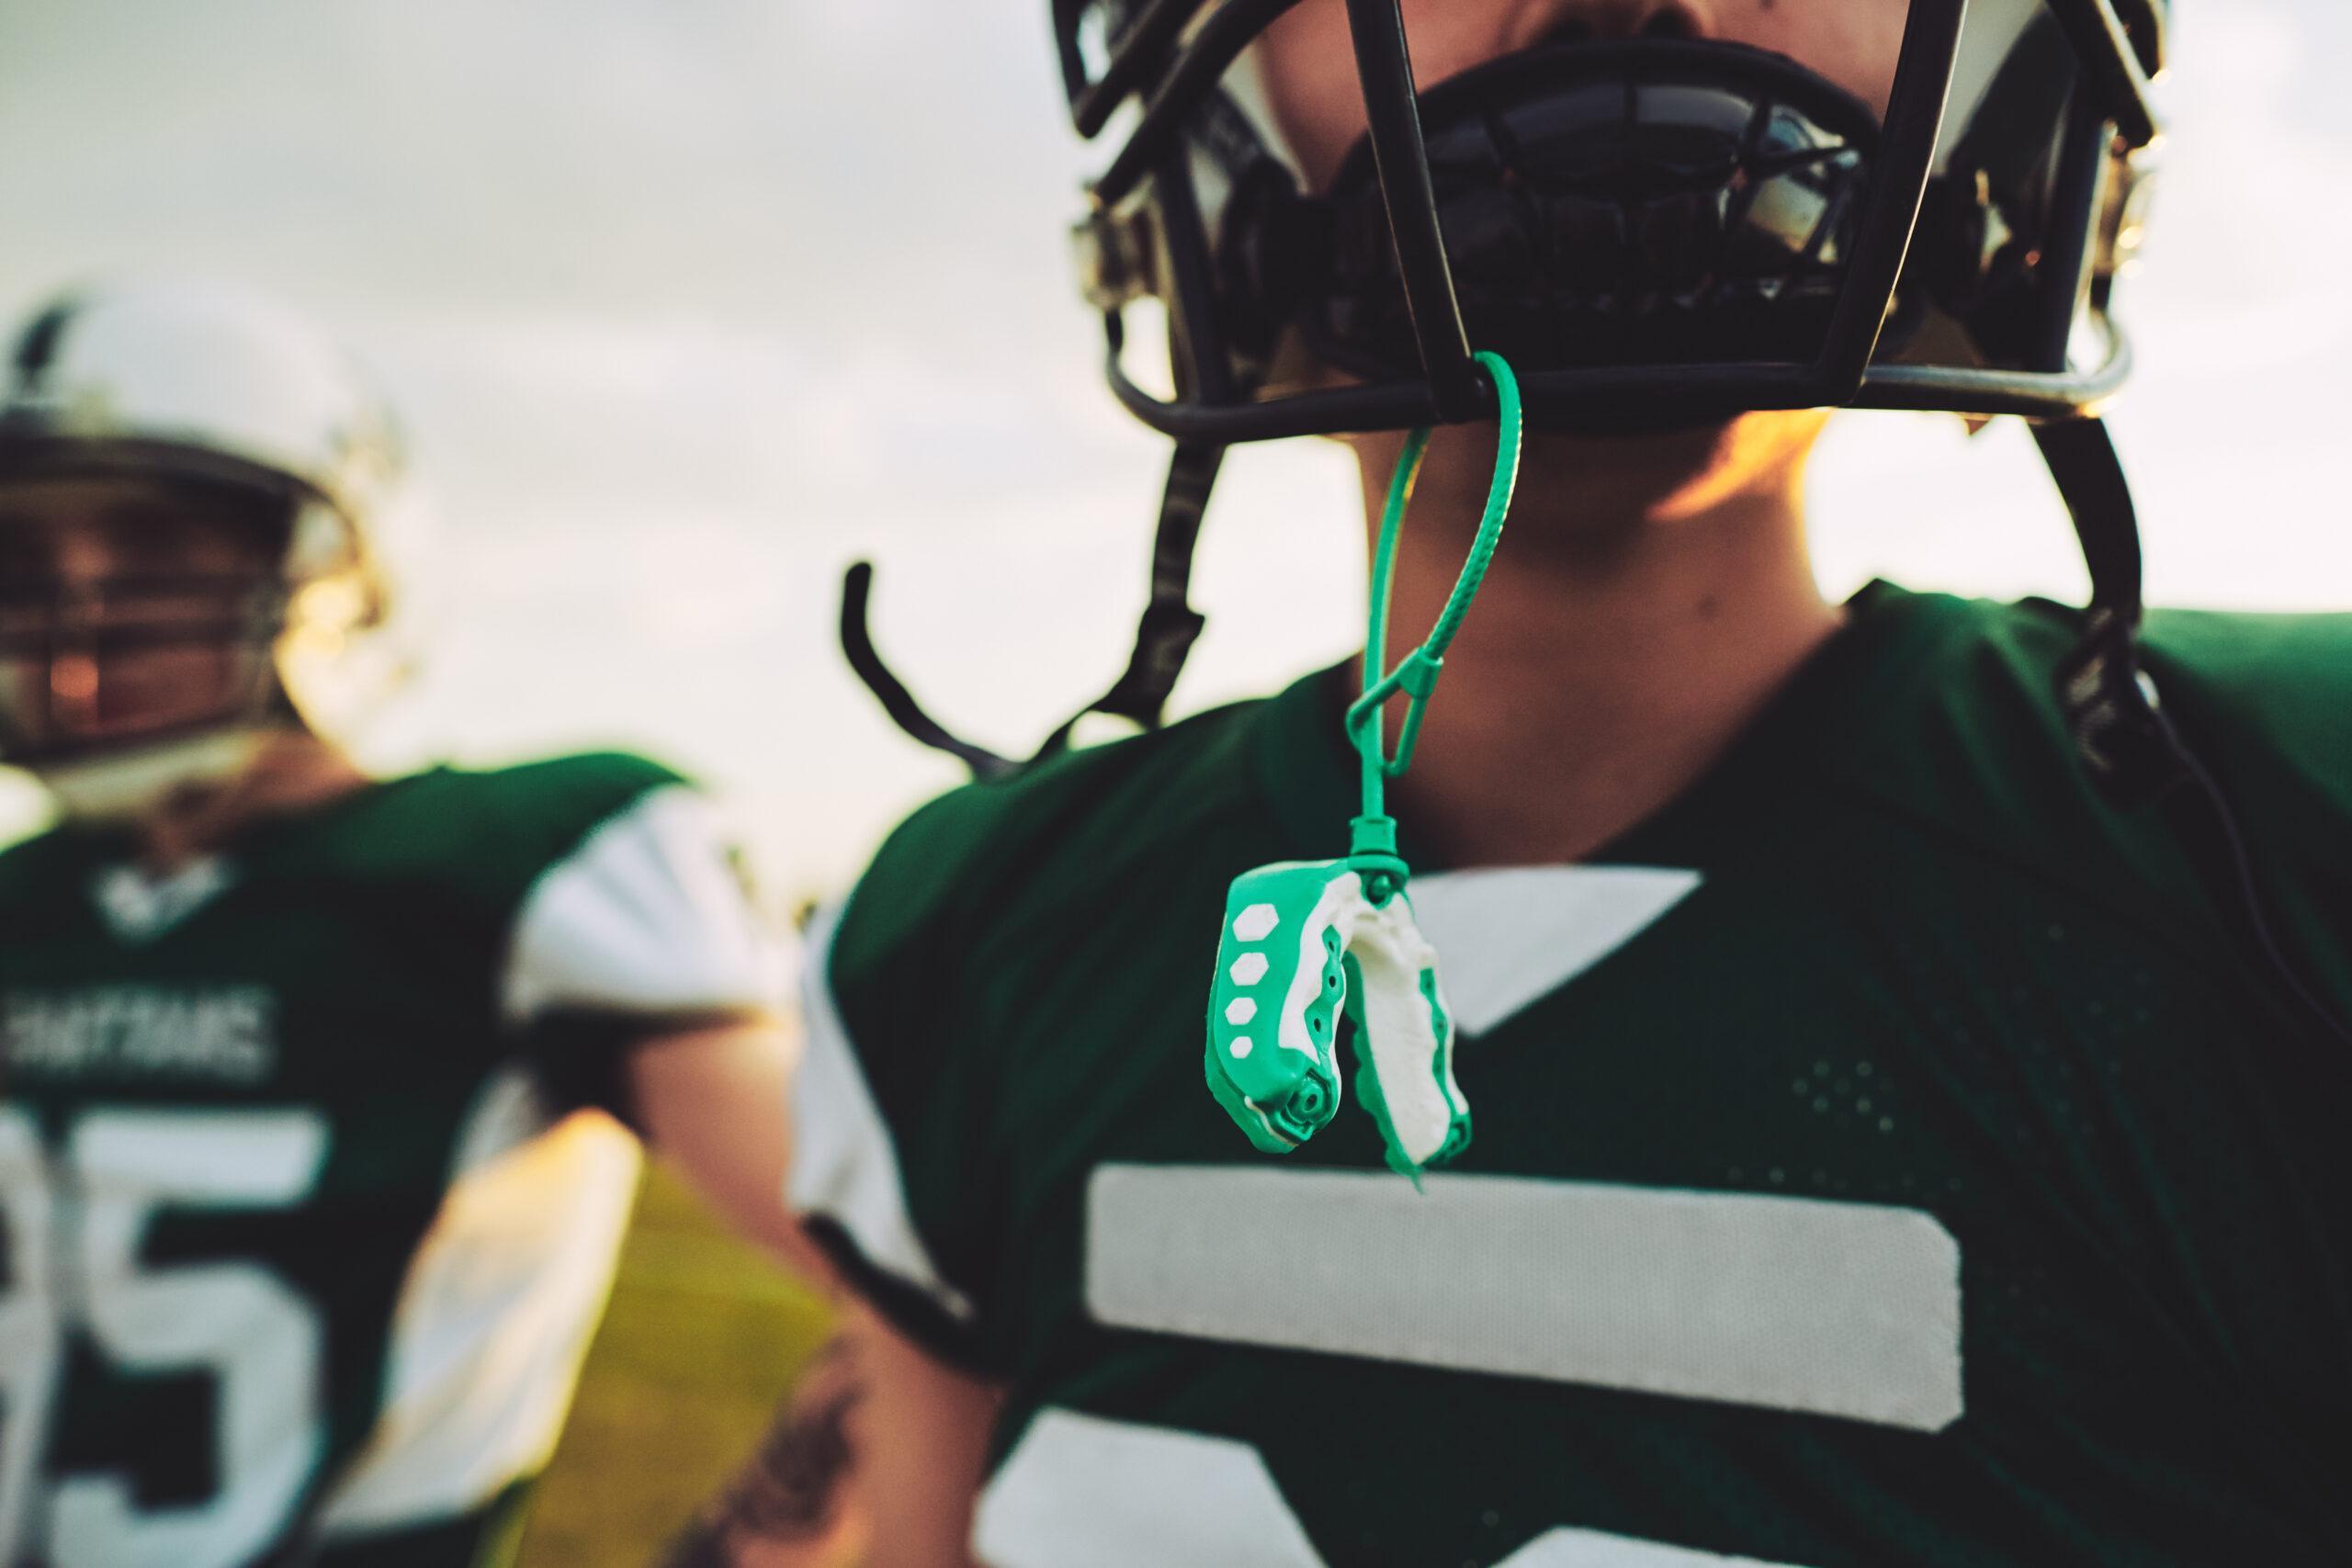 How to choose a mouthguard for kids sports